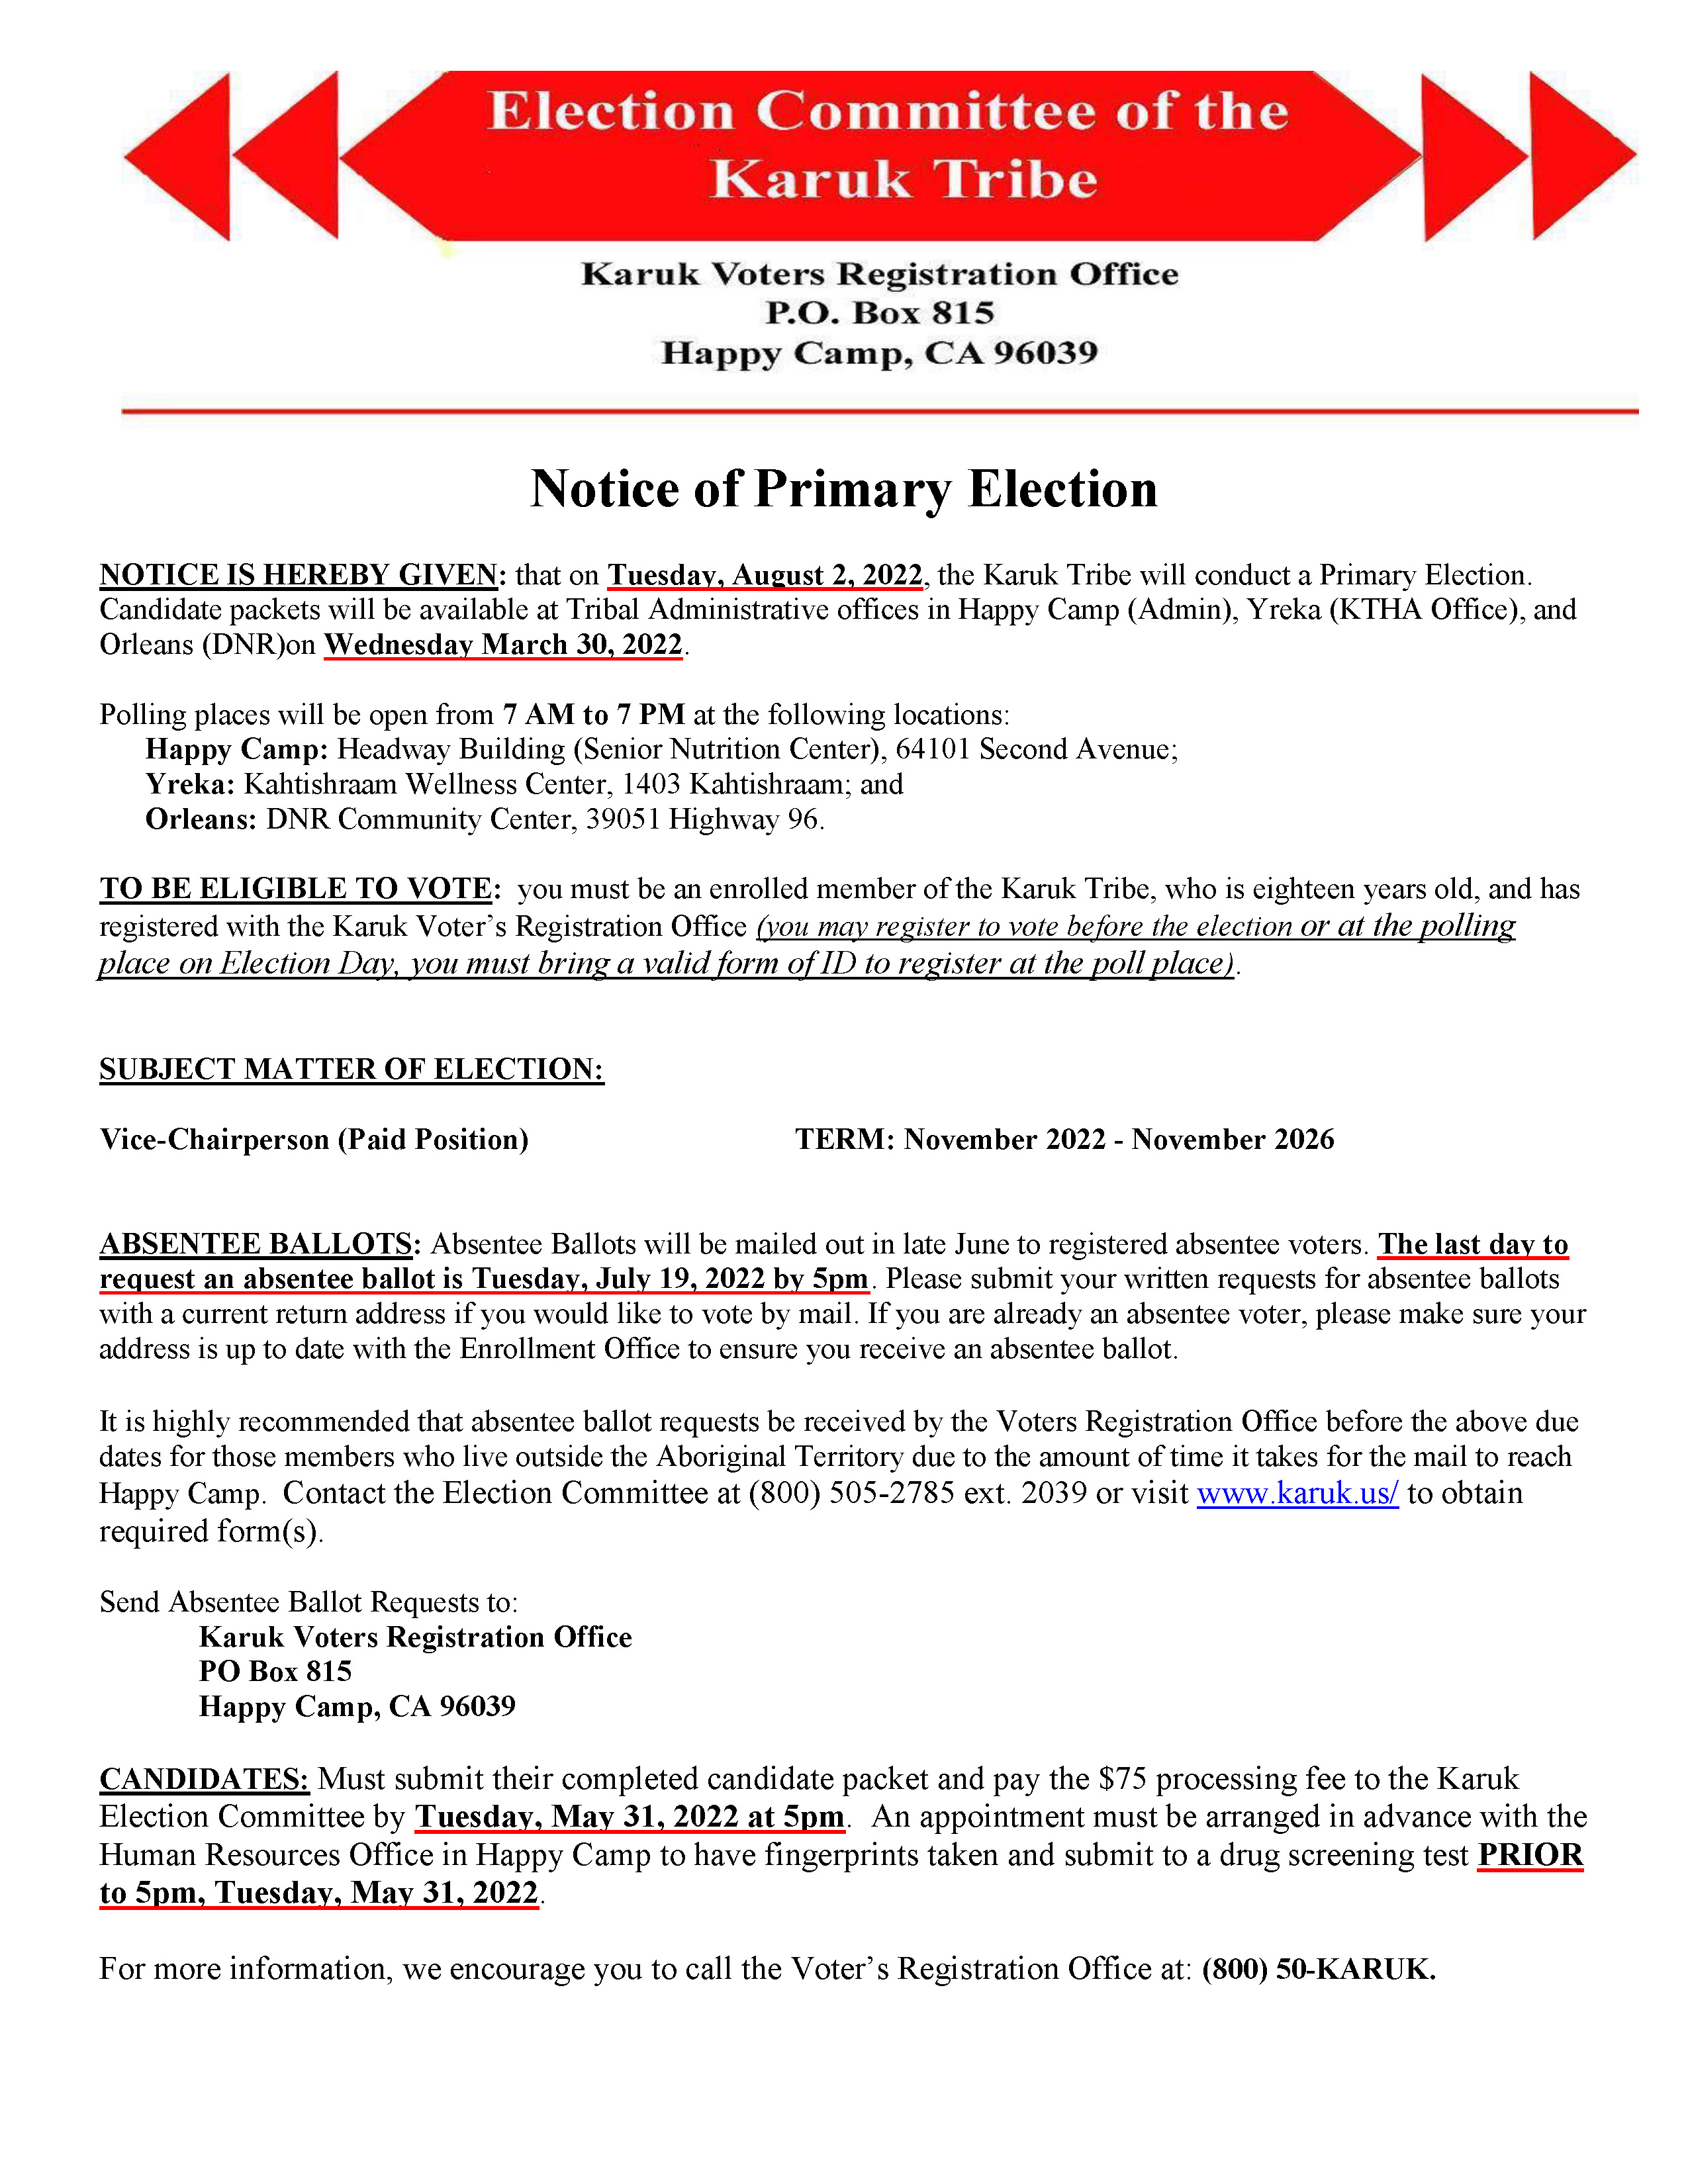 2022 Notice of Primary Election flyer 4.01.22